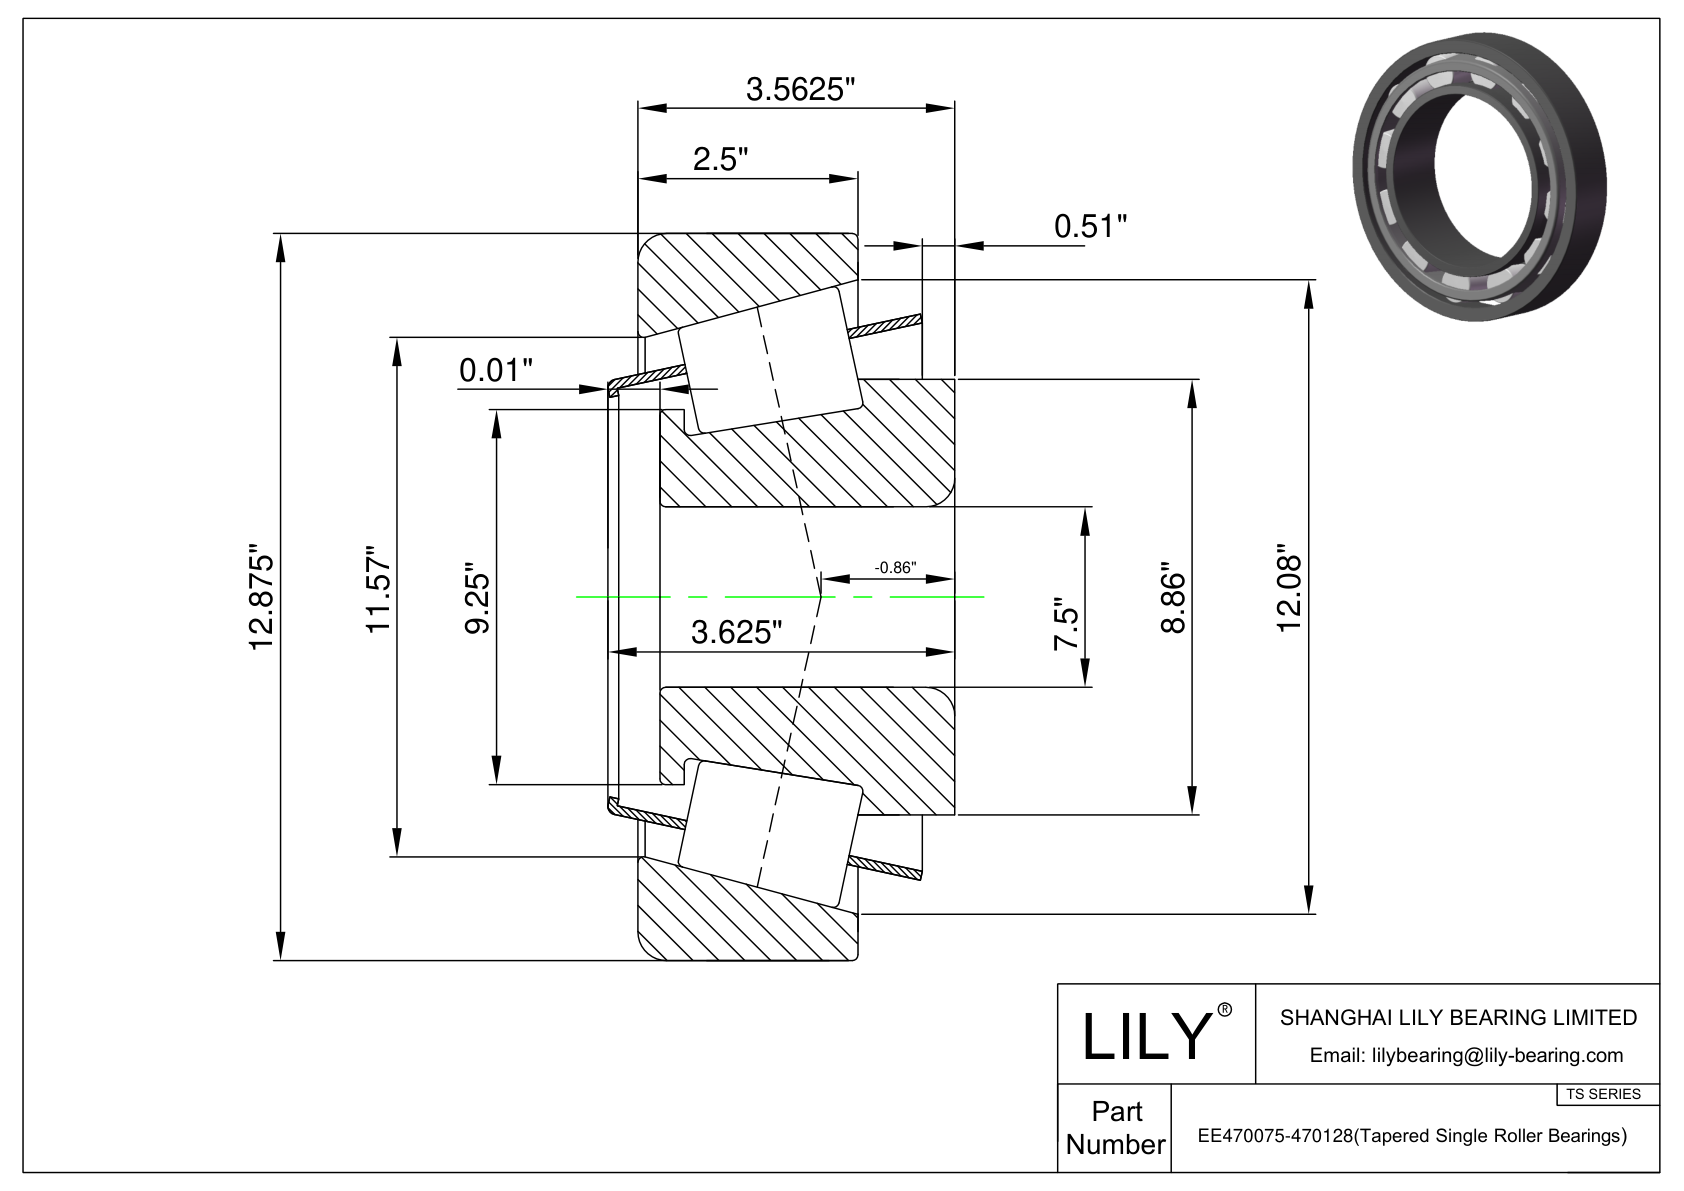 EE470075-470128 TS (Tapered Single Roller Bearings) (Imperial) cad drawing